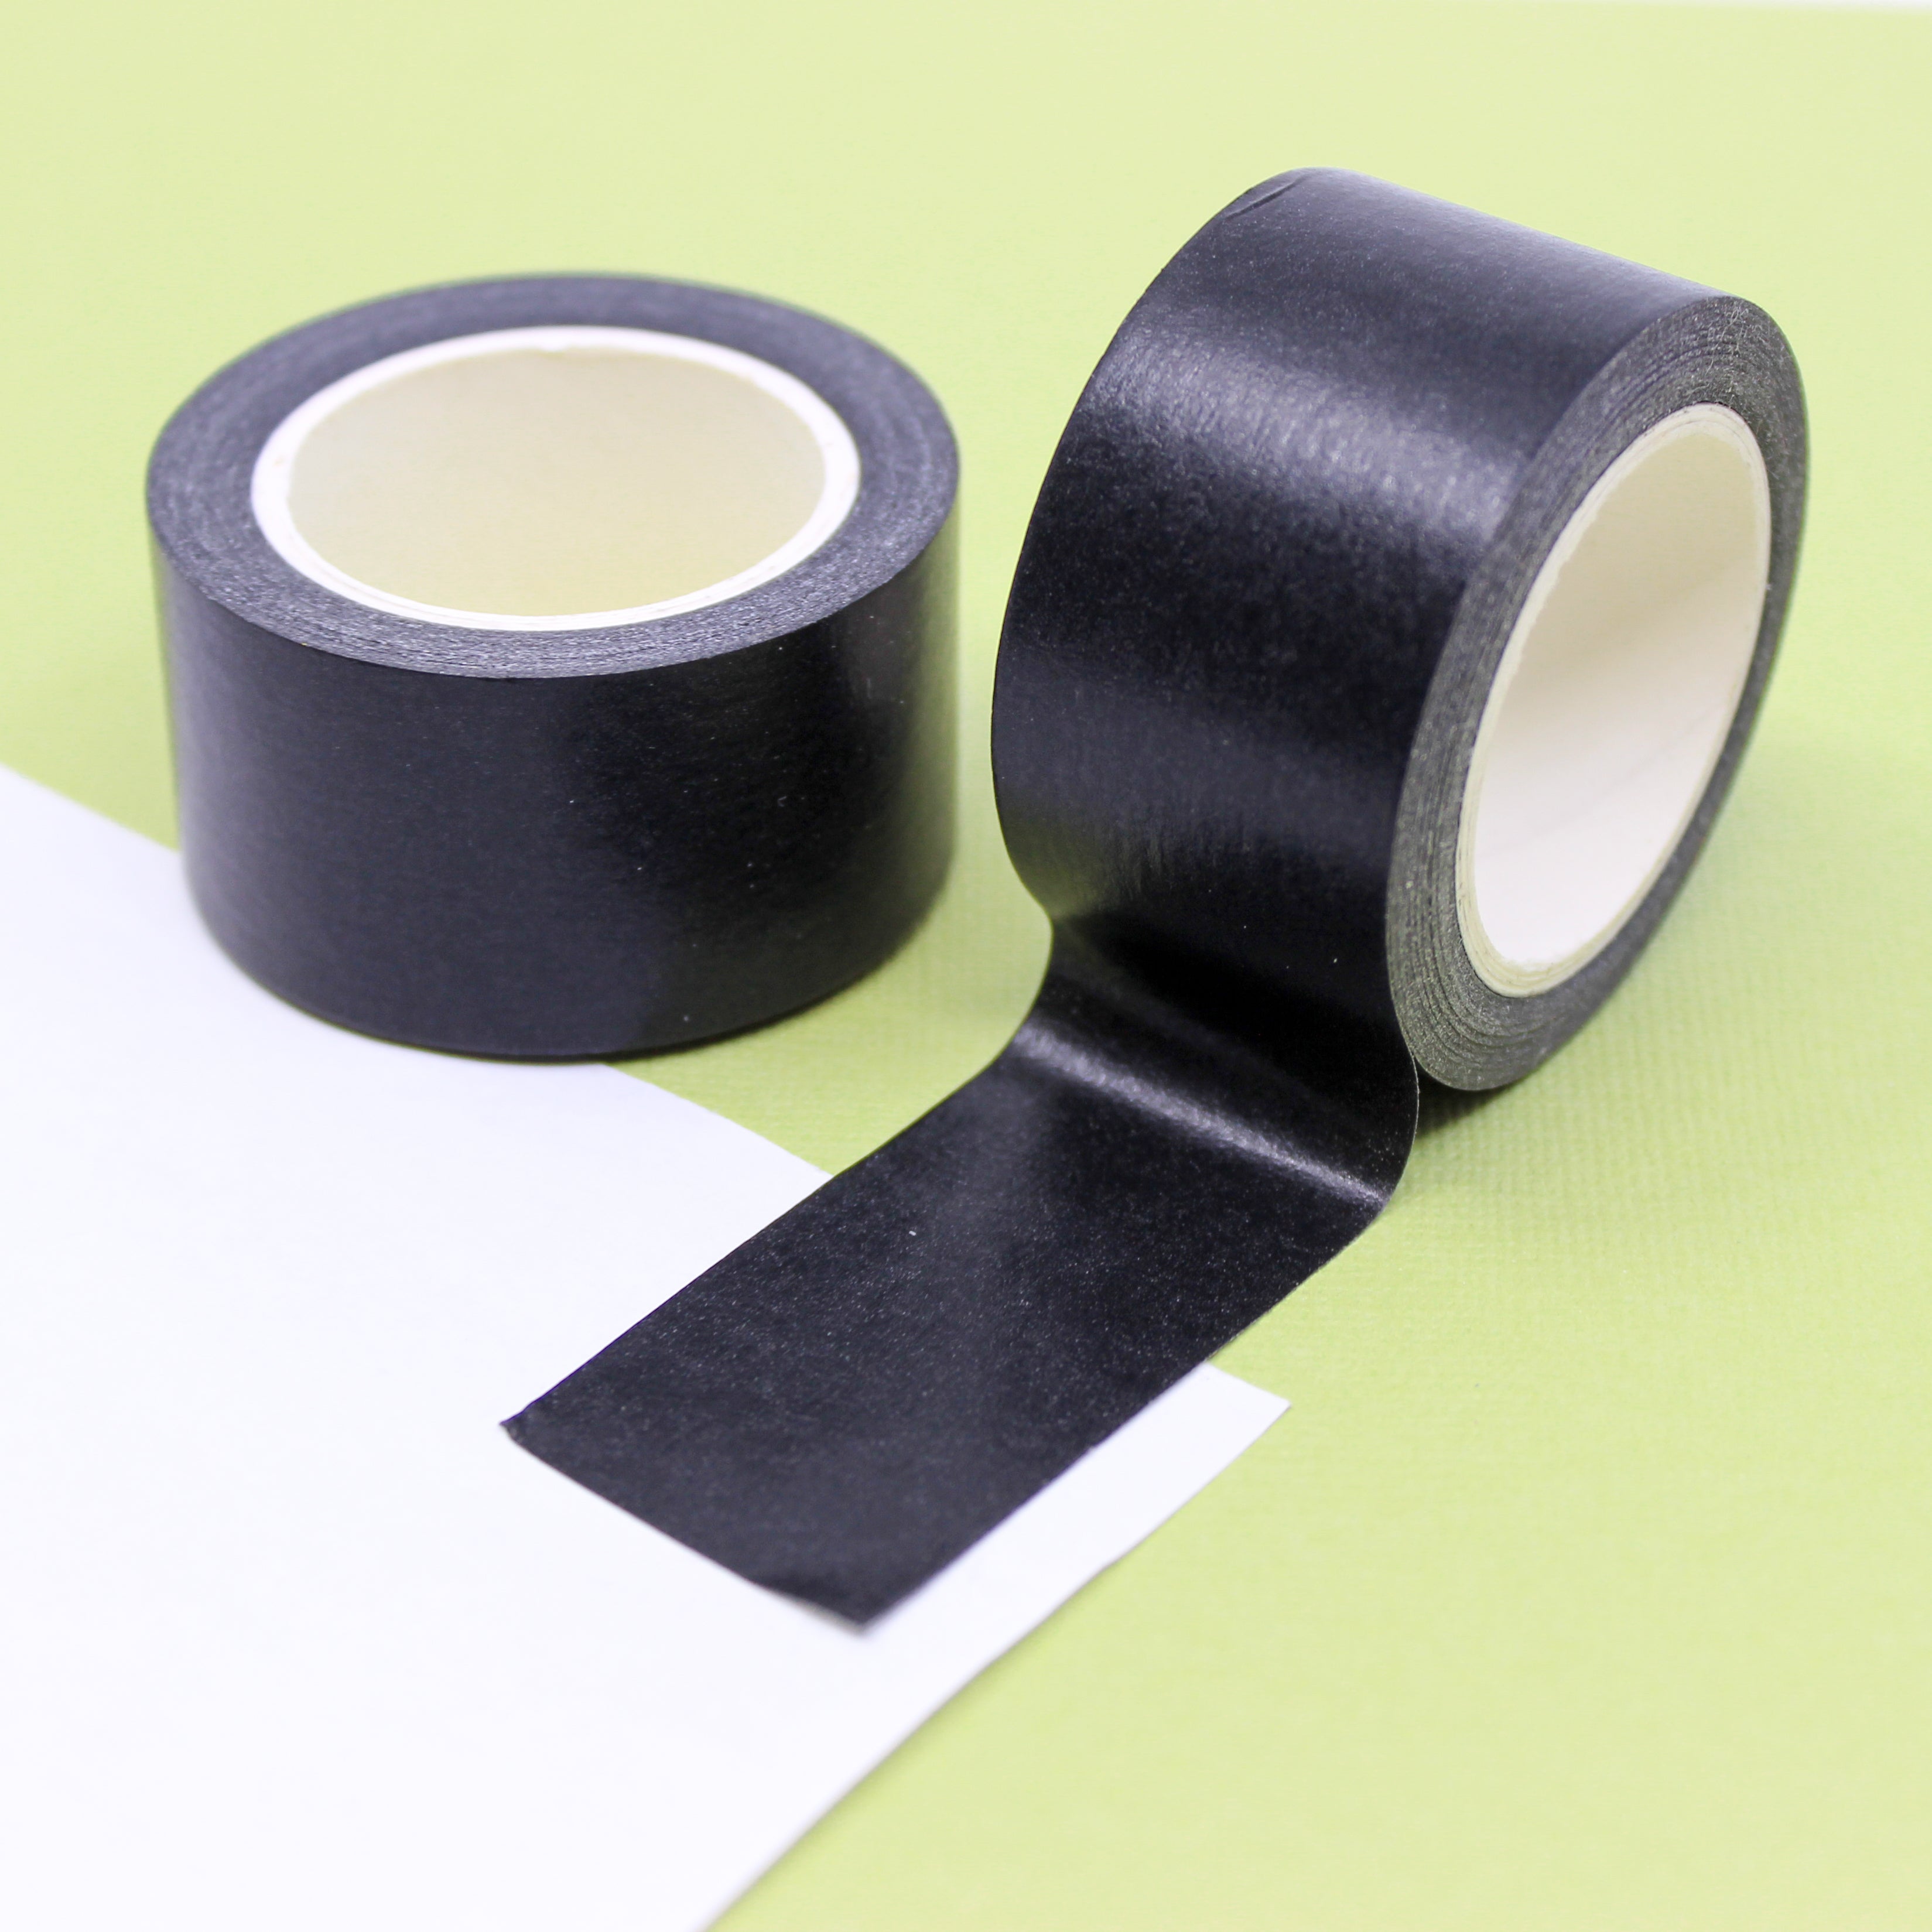 Enhance your crafts with our solid black washi tape, featuring a sleek and versatile design in a classic black hue, perfect for adding depth and contrast to your projects. This tape is sold exclusively at BBB Supplies Craft Shop.